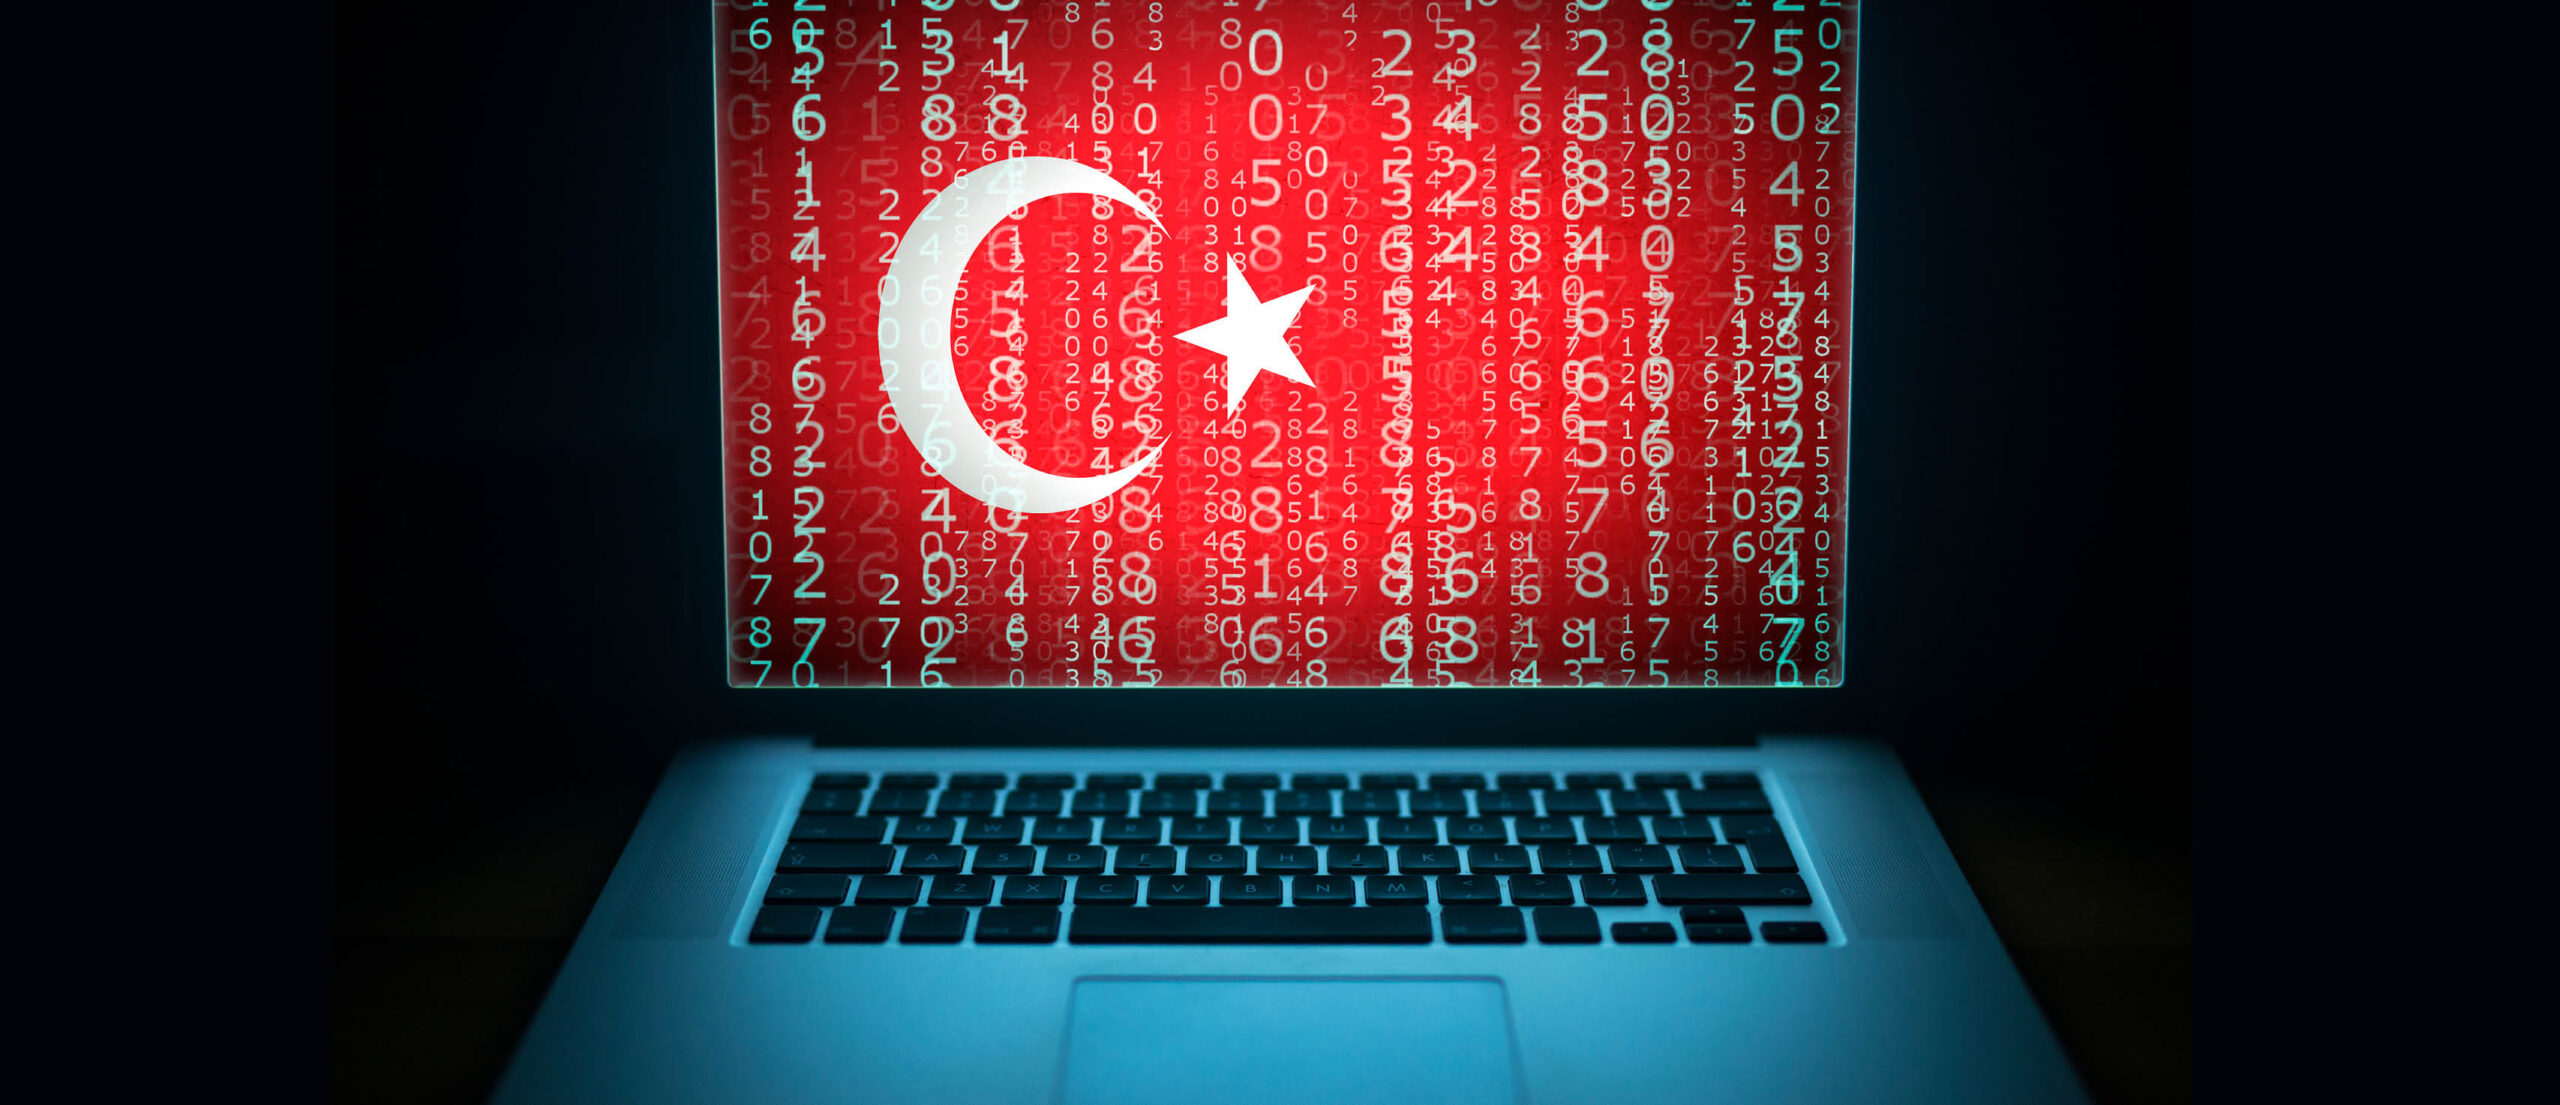 This image depicts a laptop that shows the Turkish flag with an overlay of code.